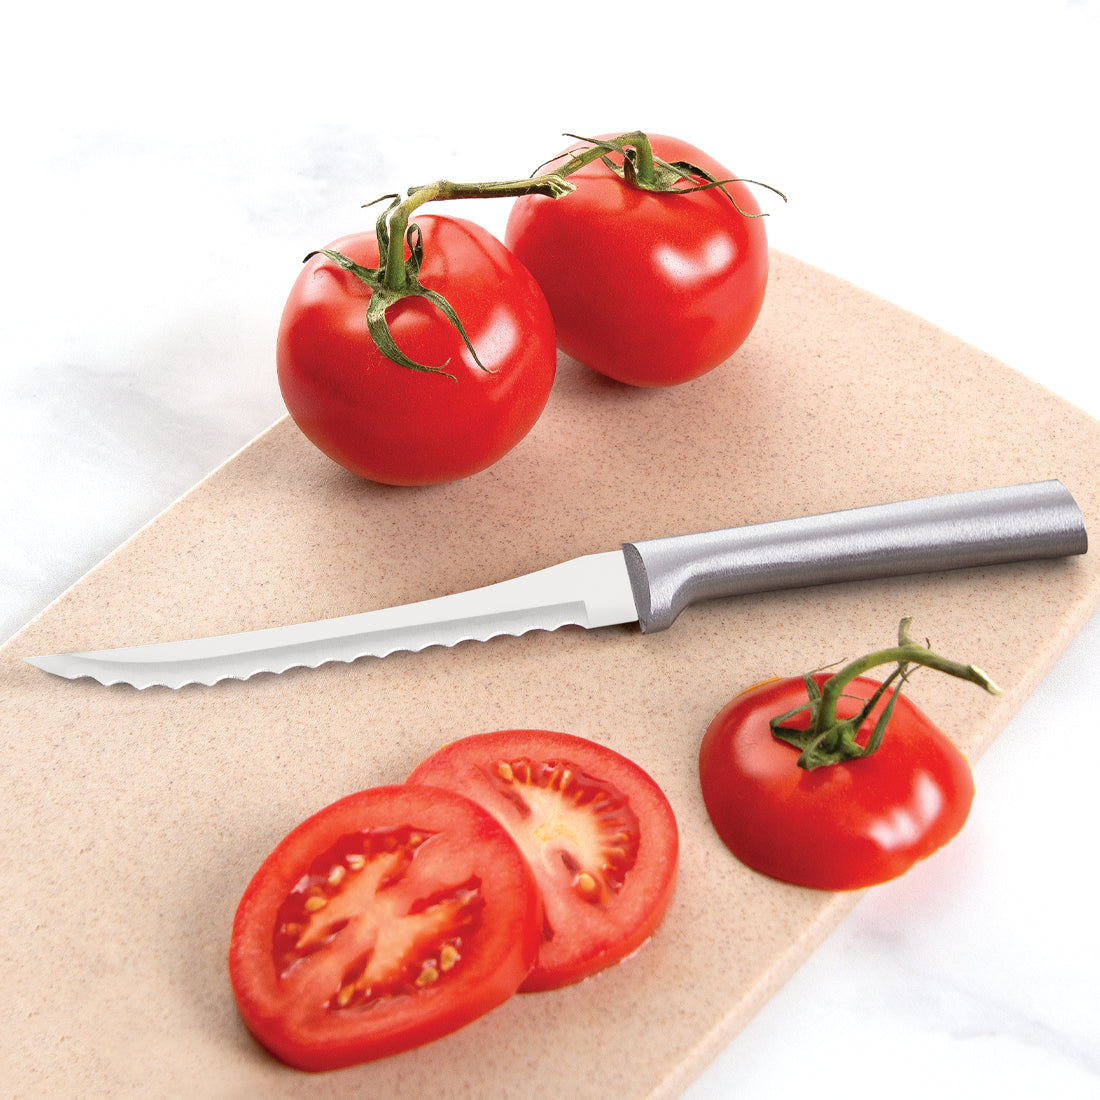 Rada Cutlery Tomato Slicer knife with silver handle and sliced tomatoes on cutting board.